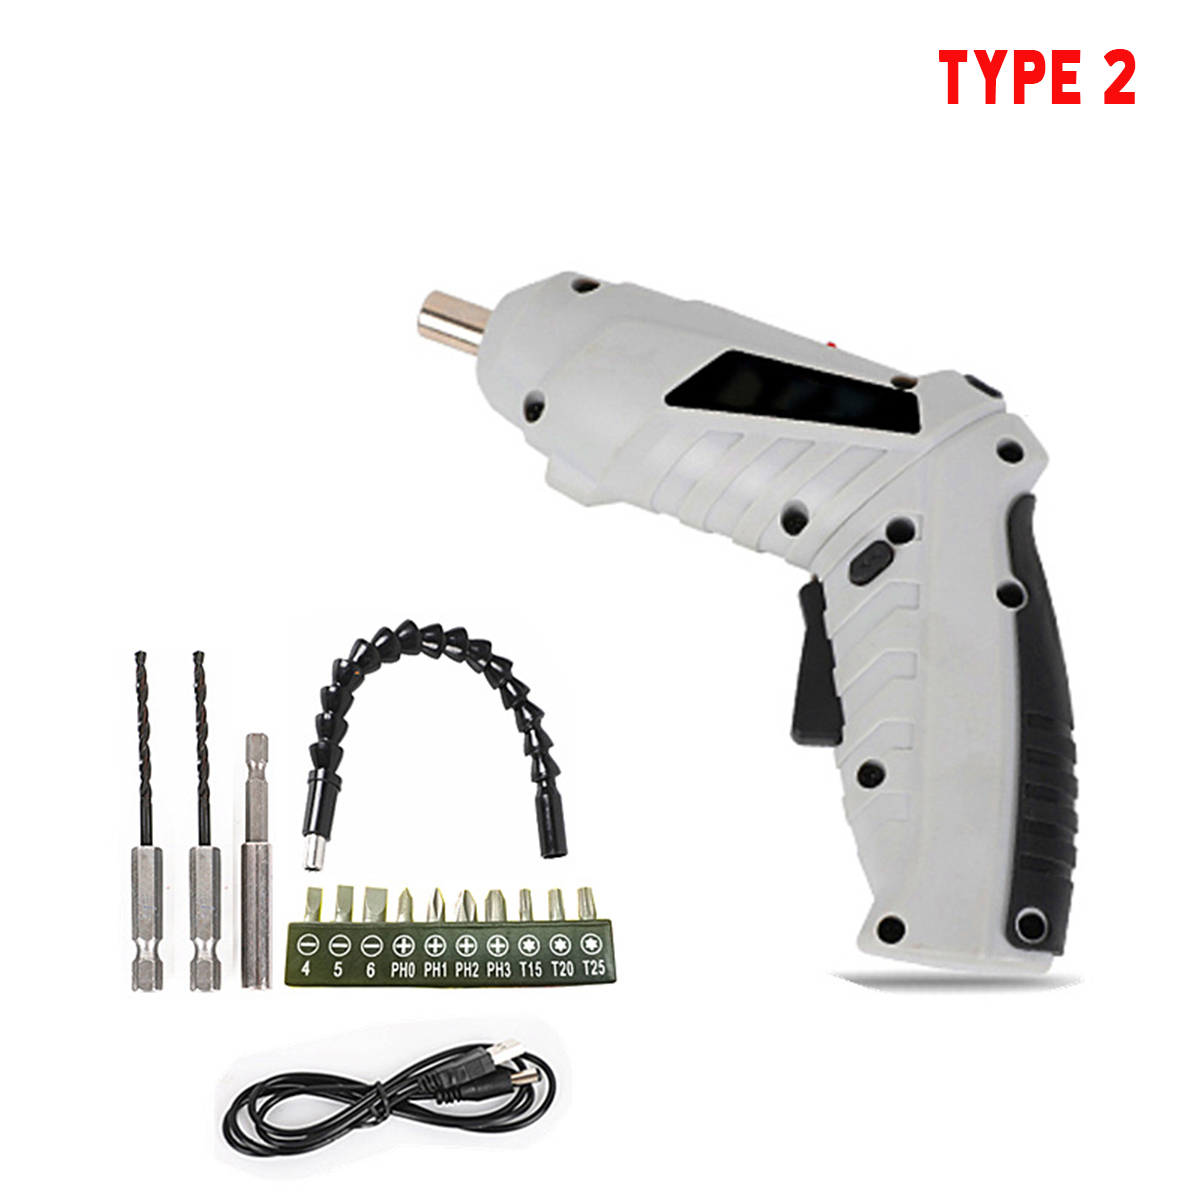 Mini Cordless Electric Screwdriver Set USB Rechargeable Drill Driver With Work Light 43